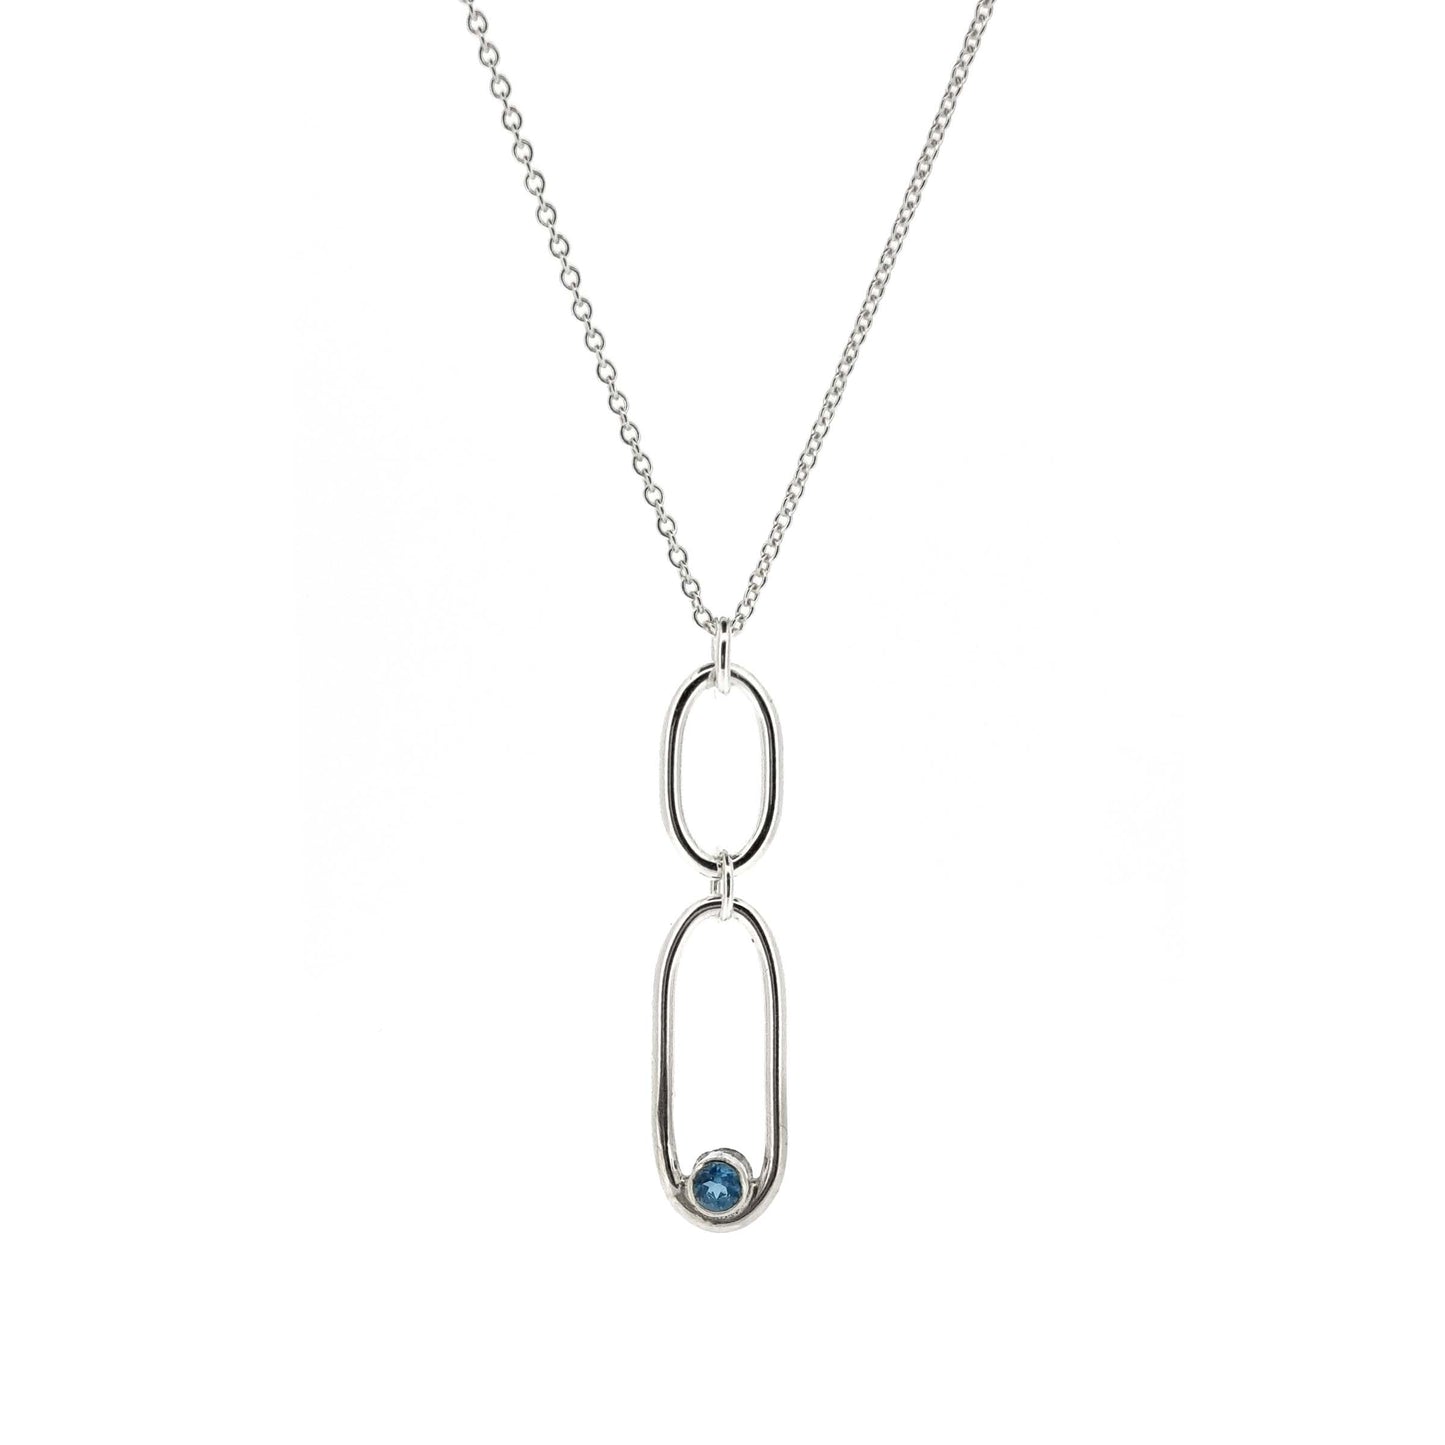 A silver pendant featuring 2 open oblong shaped of different sizes with a blue topaz gemstone set inside one curve. On a silver chain.